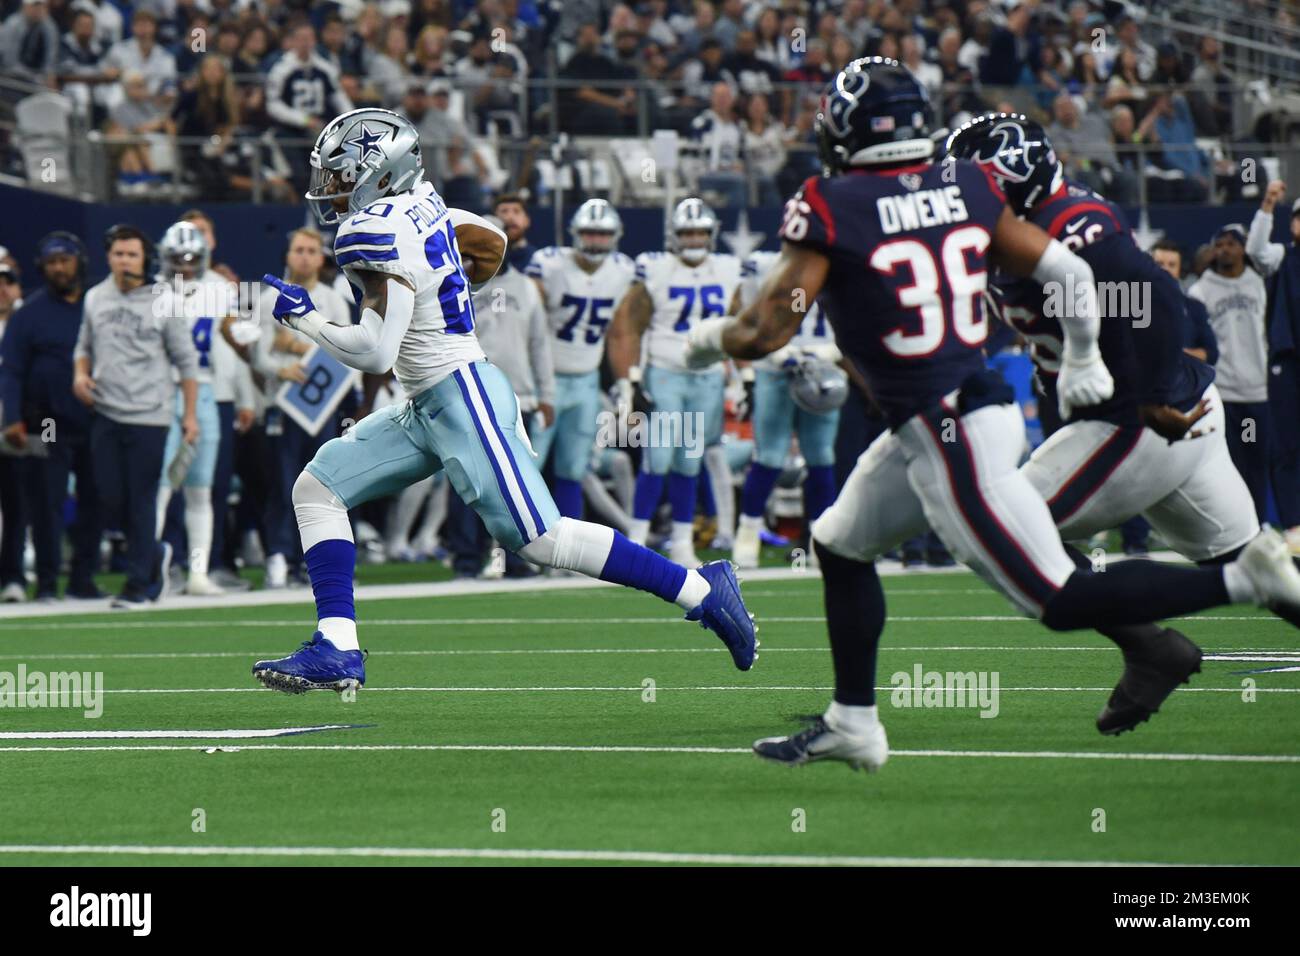 Every touch from Dallas Cowboys running back Tony Pollard's 2-TD game vs.  New York Giants on 'Sunday Night Football'